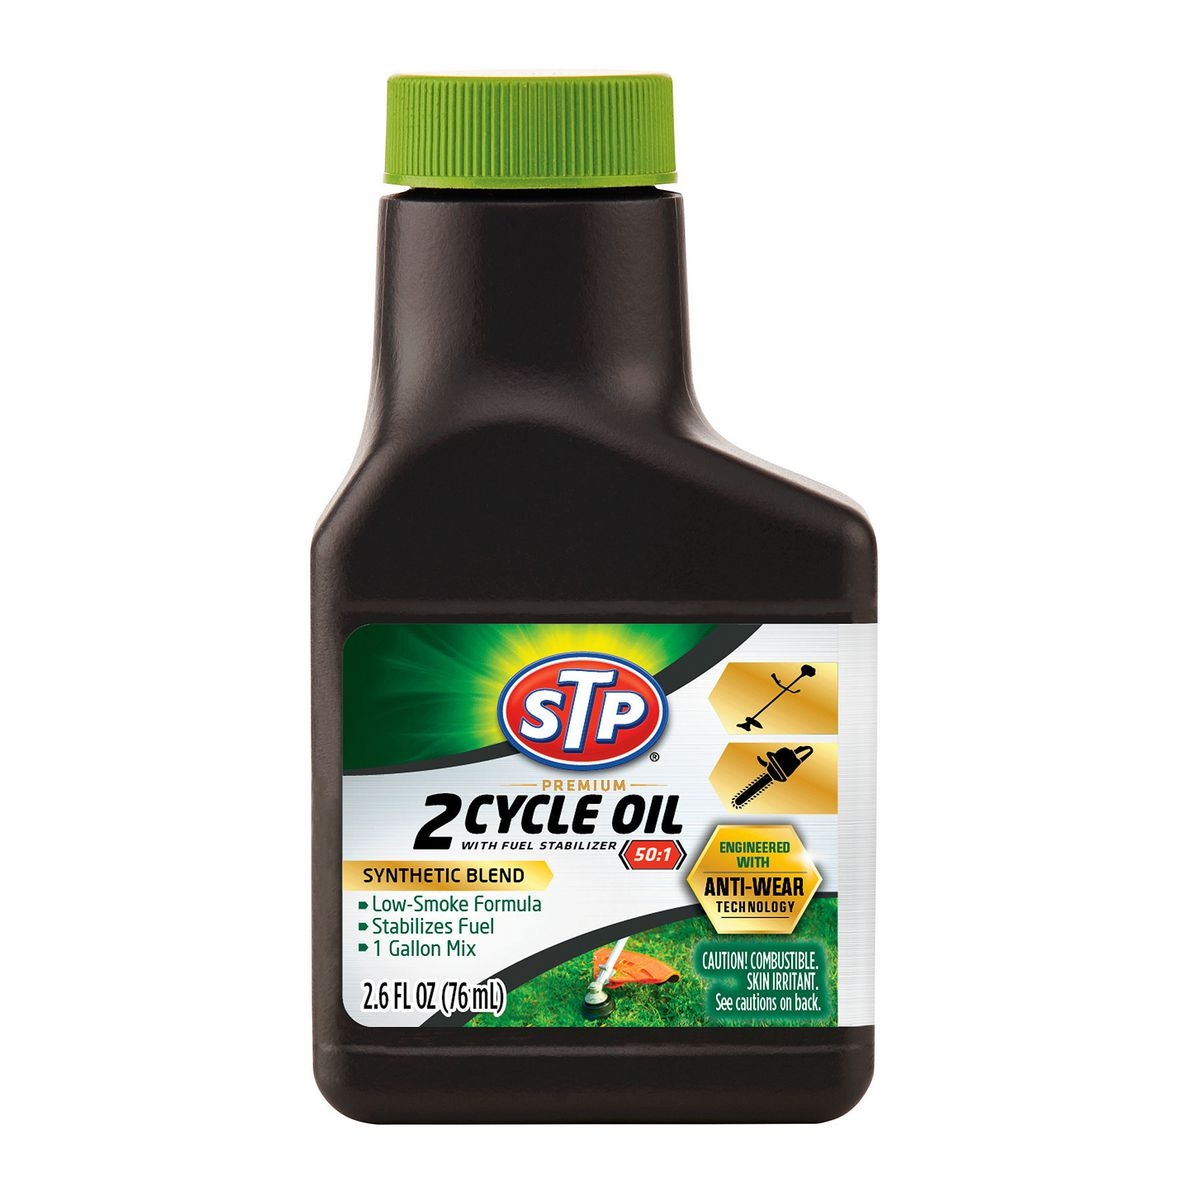 STP 2.6 oz. 50:1 Two-Cycle Oil - Item 56840